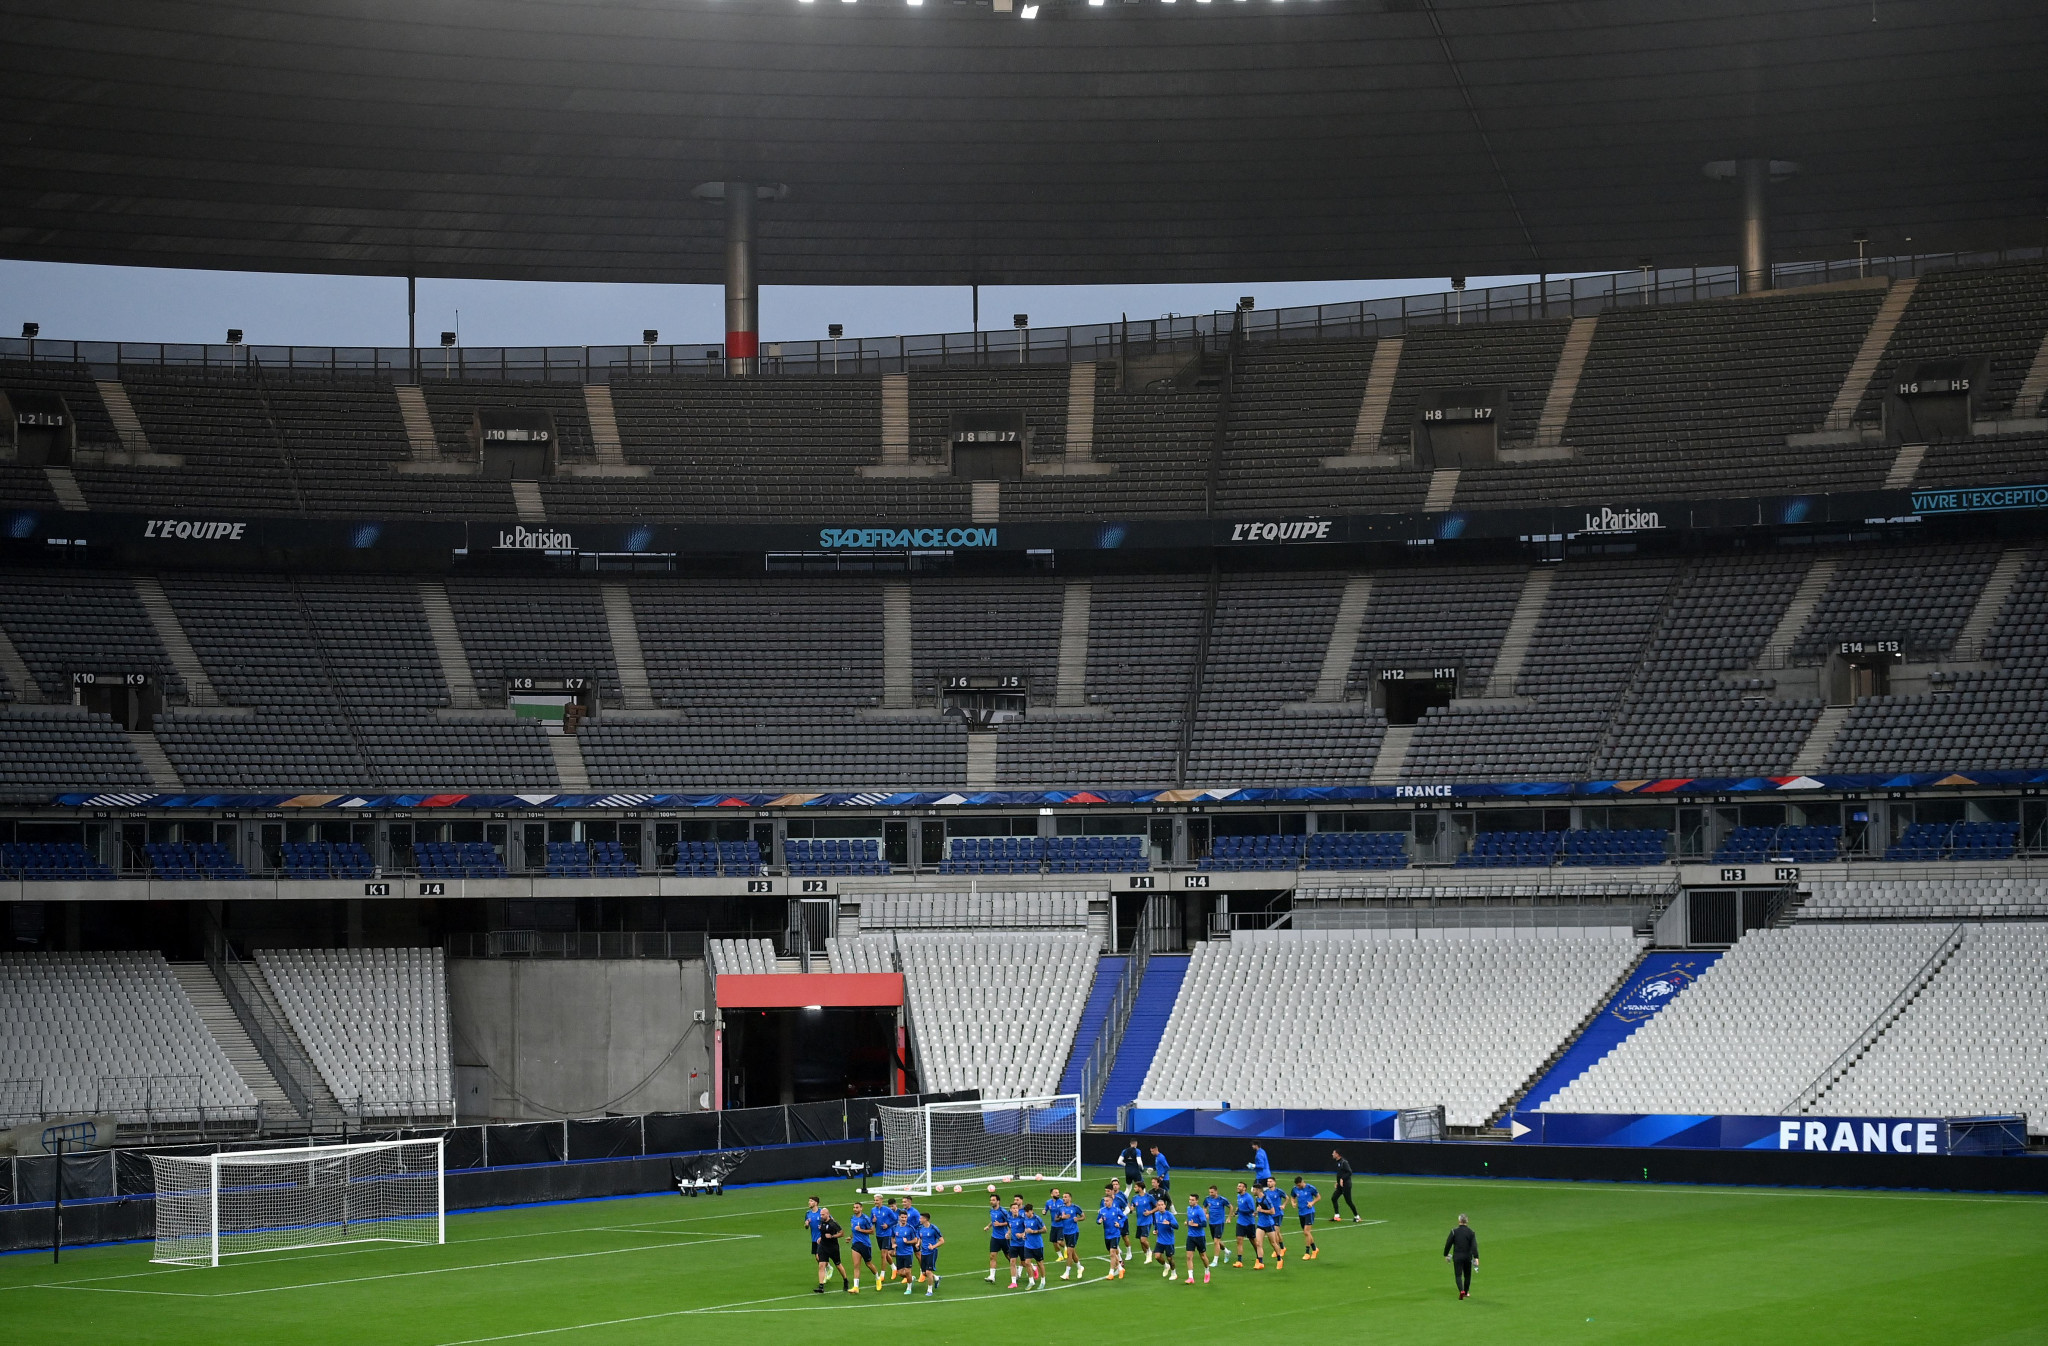 Maintaining major events and 80,000 capacity part of bidding conditions for Stade de France